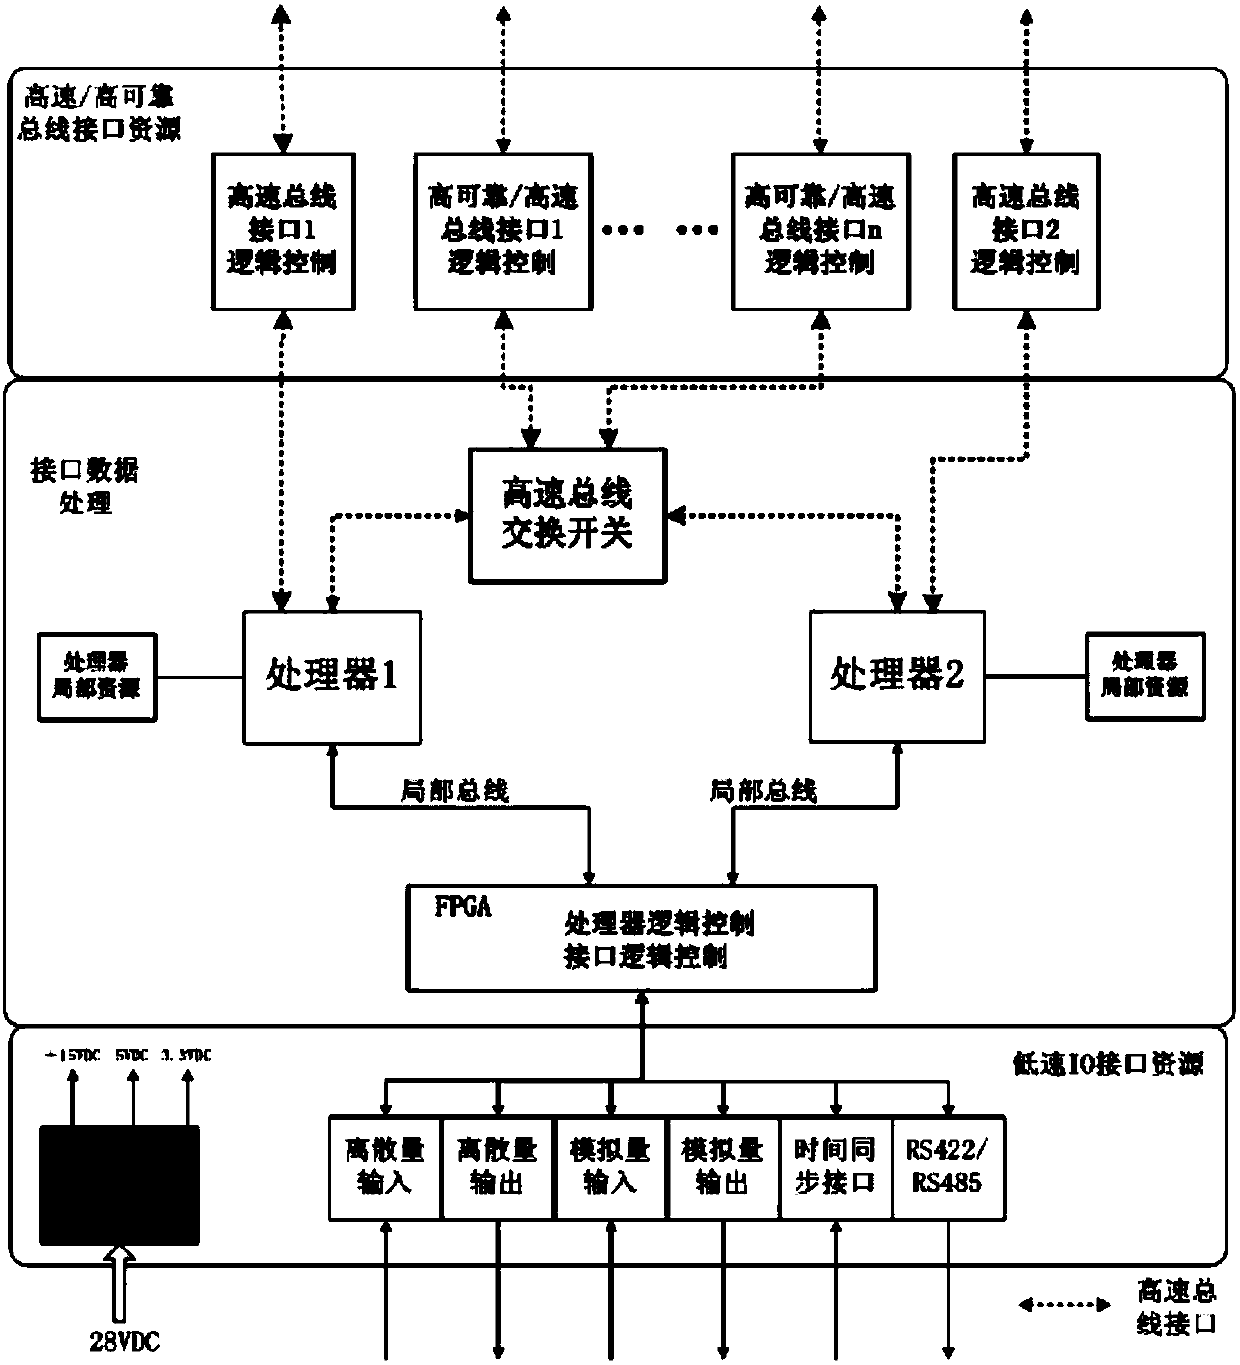 High-reliability comprehensive system interface processing module architecture